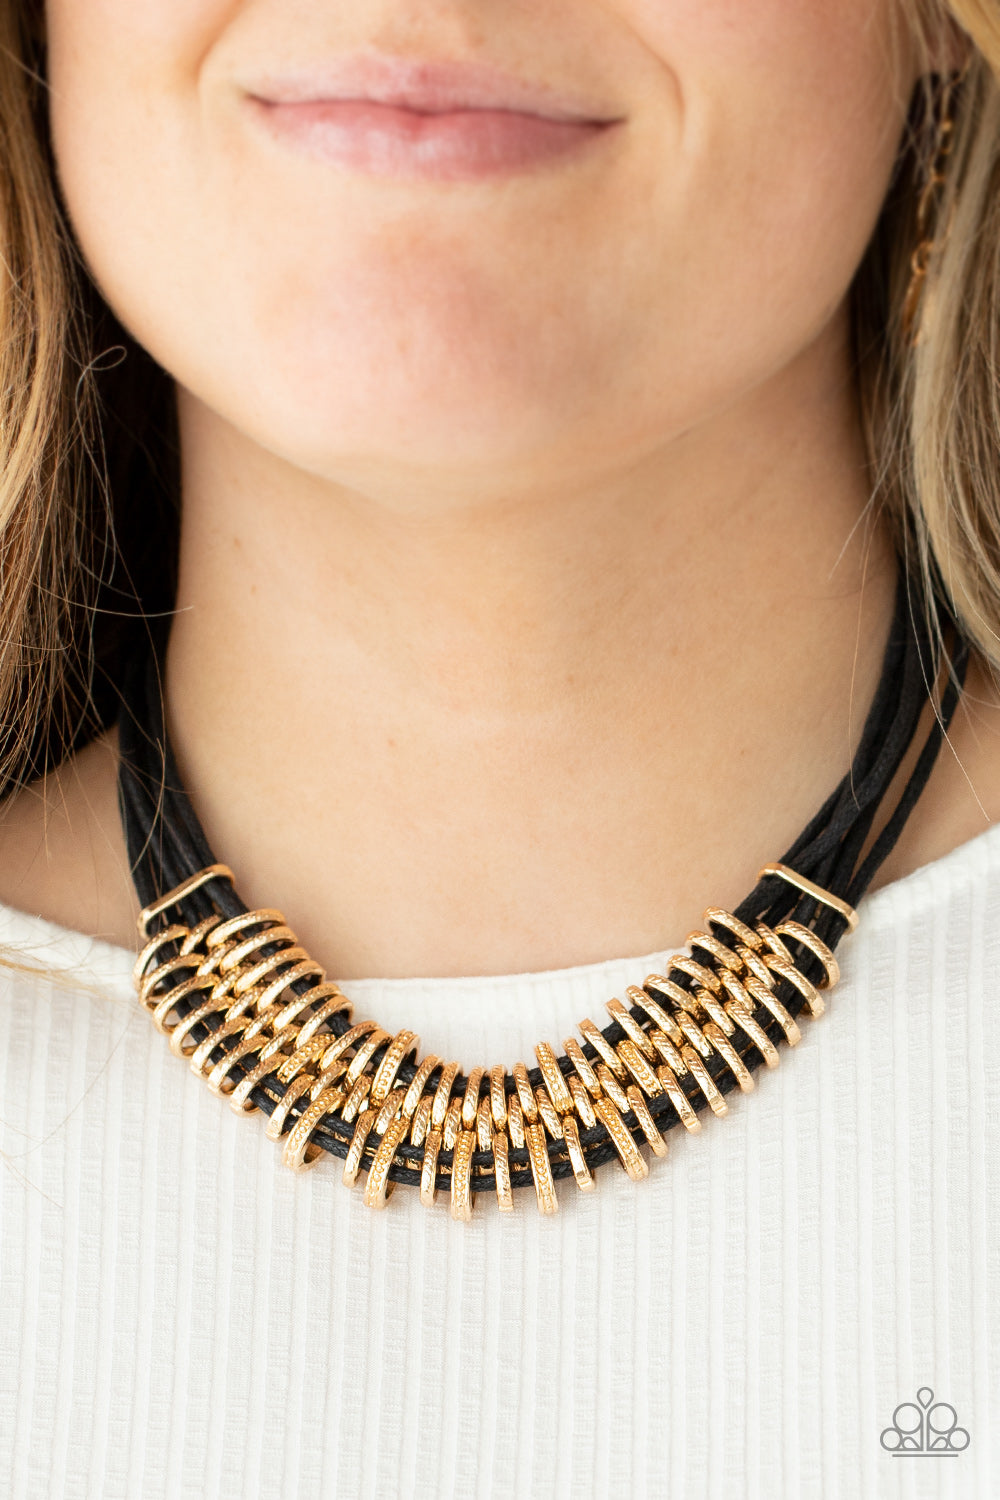 Paparazzi - Lock, Stock, and SPARKLE - Gold Necklace